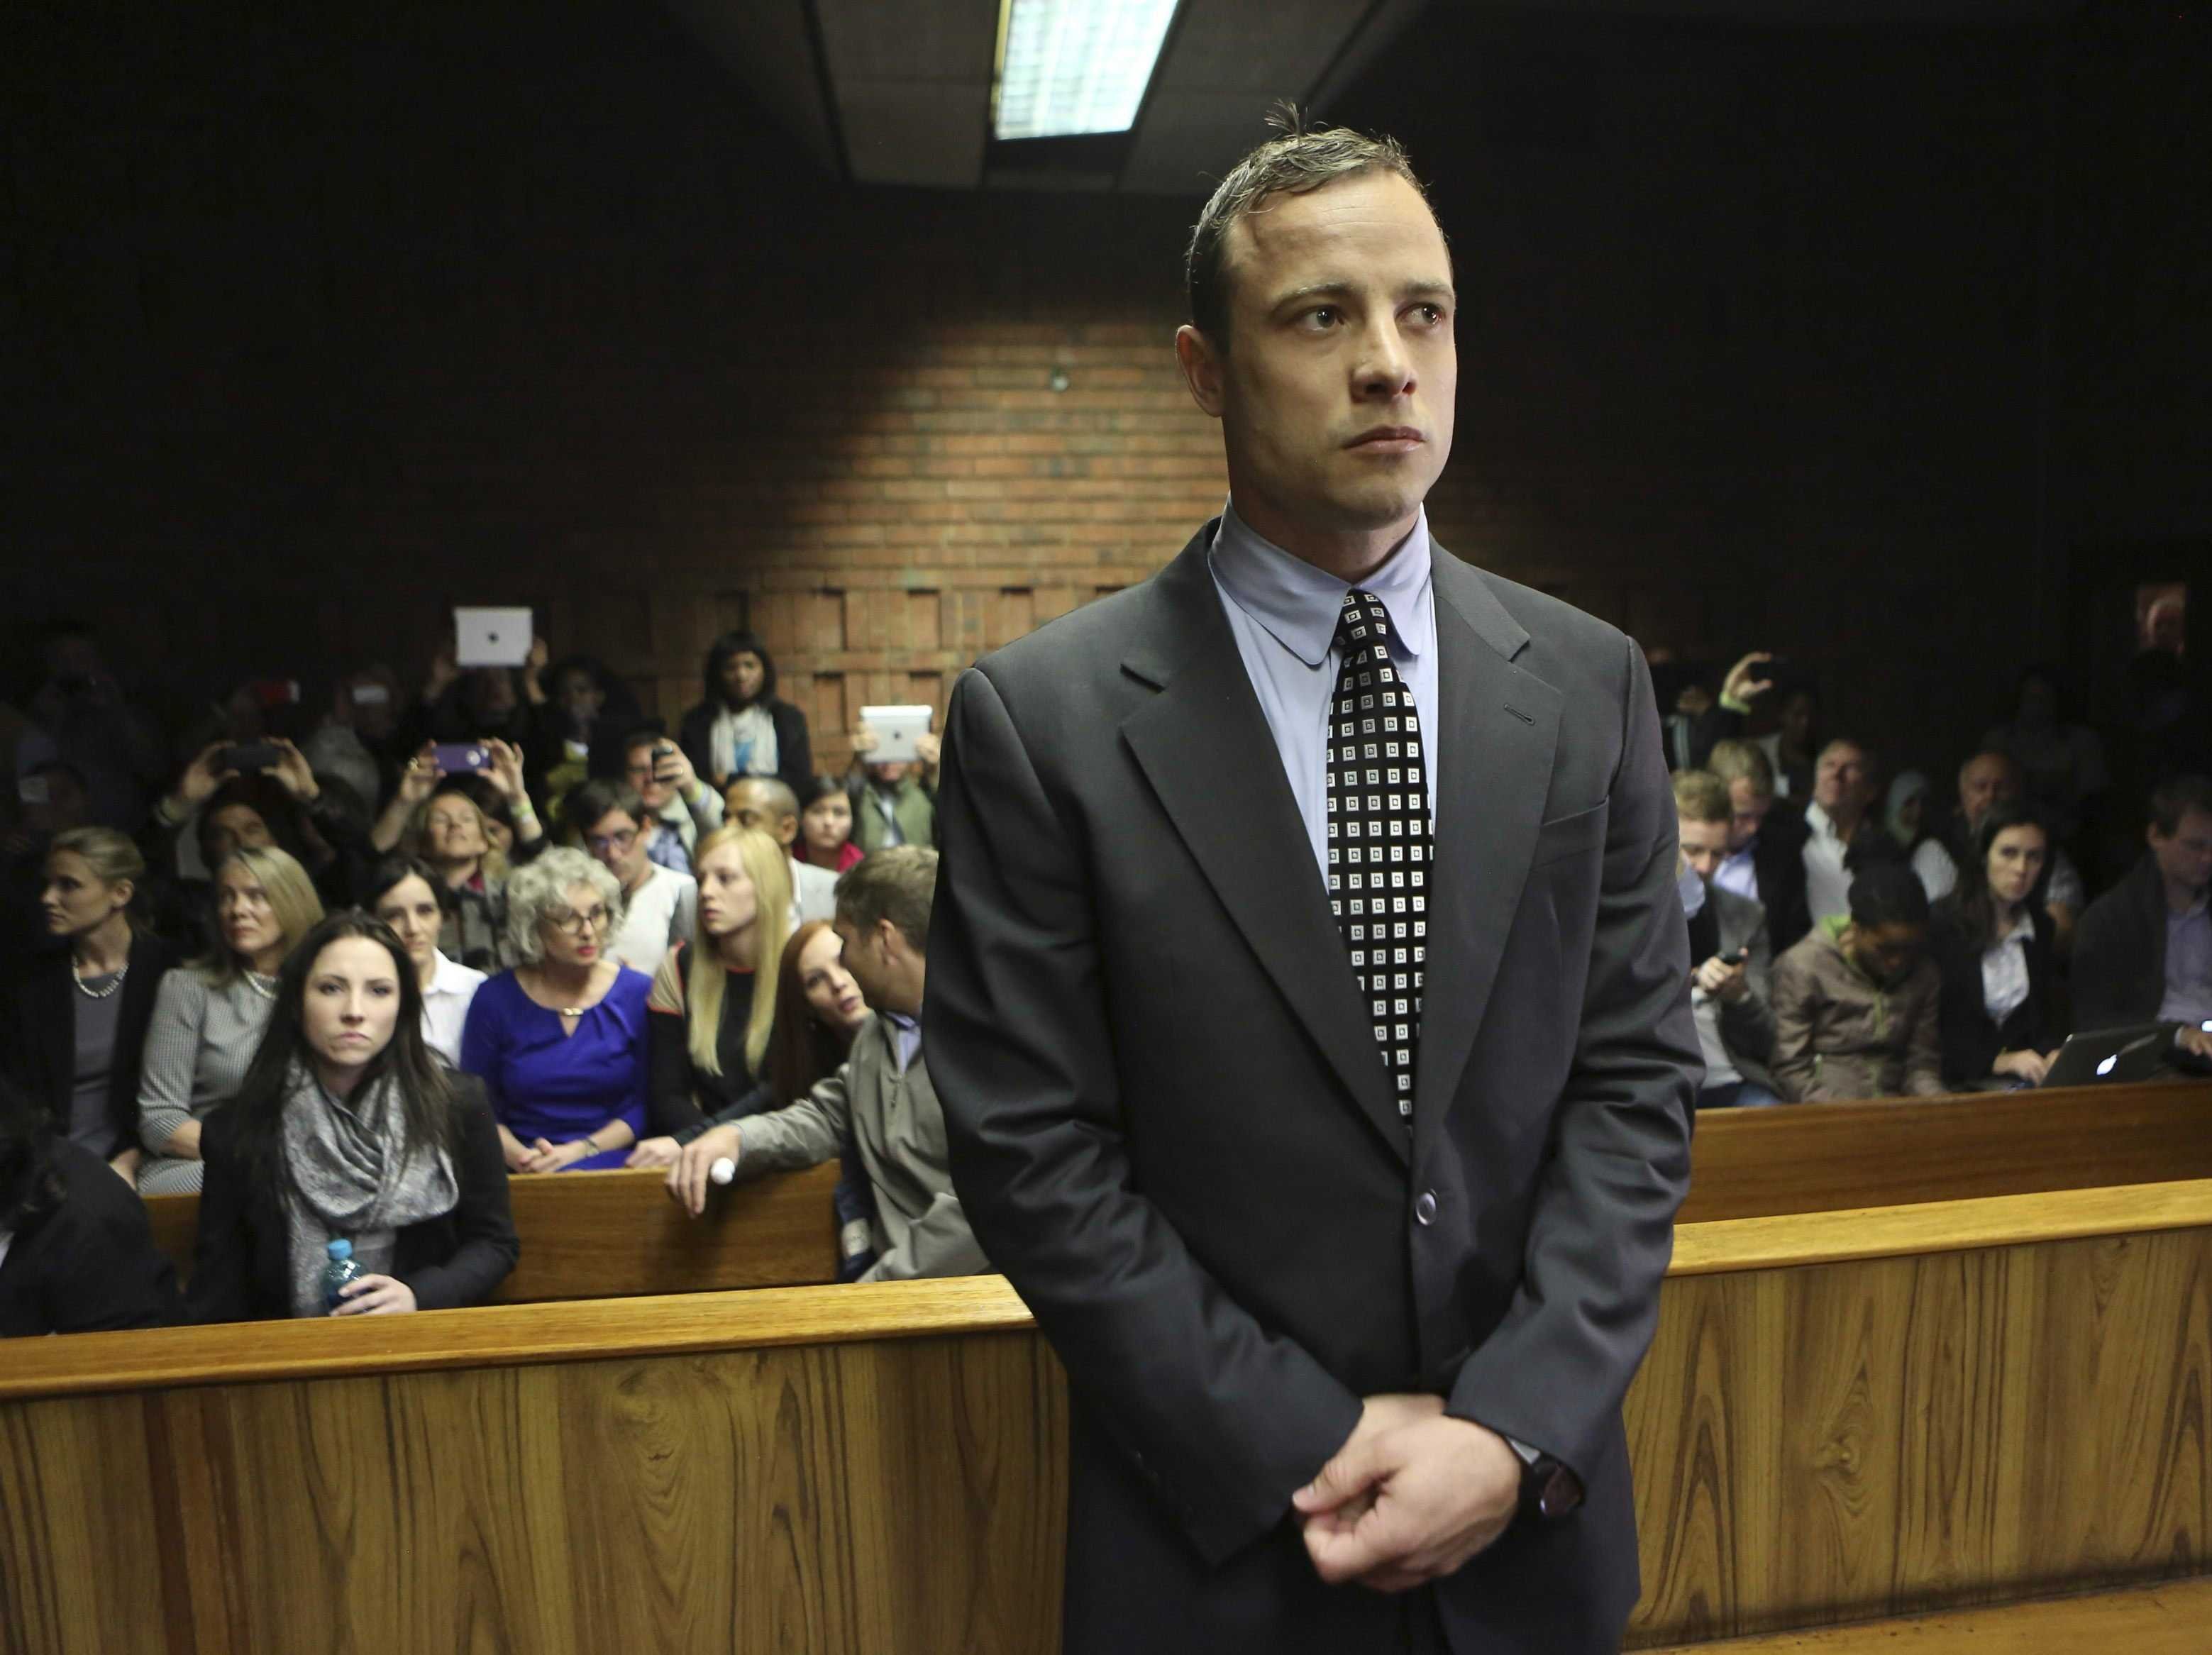 Oscar Pistorius Released From Jail, Now Under House Arrest The ICIR